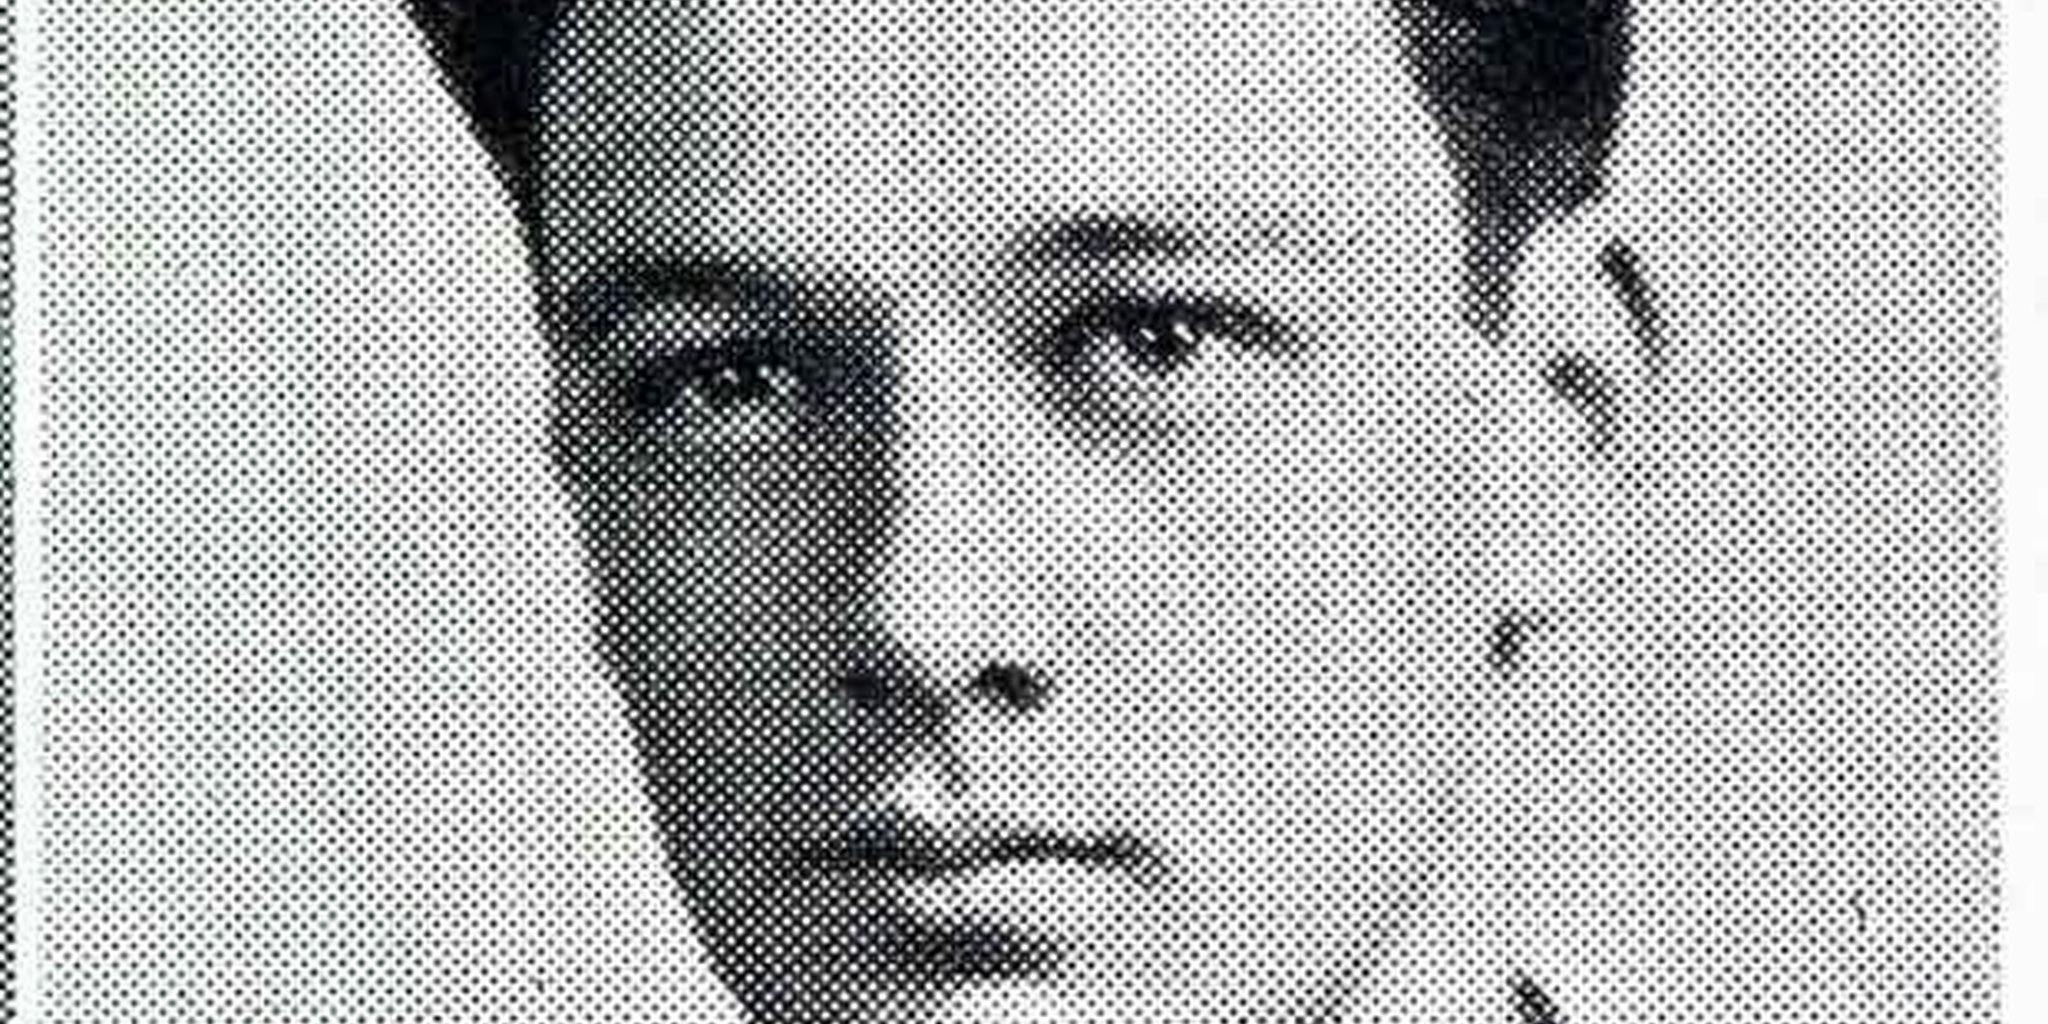 Marvel at Stan Lee’s super-studly 1939 yearbook photo